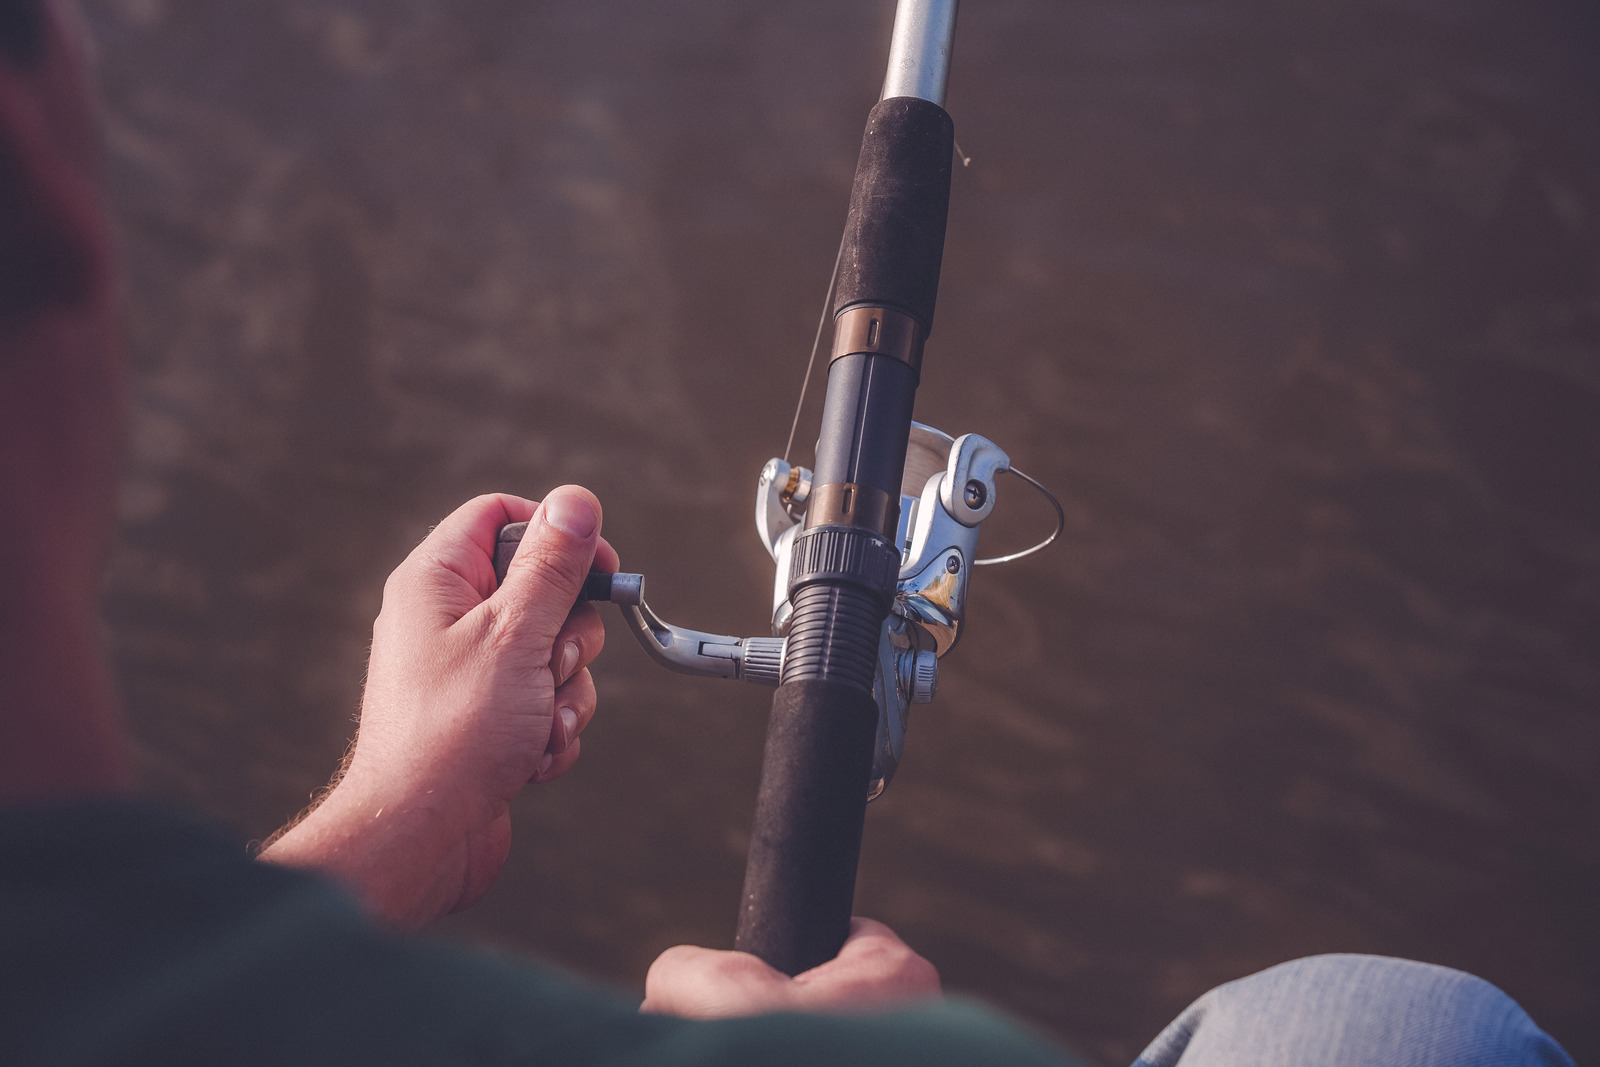 Most Expensive Fishing Rods Worth The Cost? [2021]